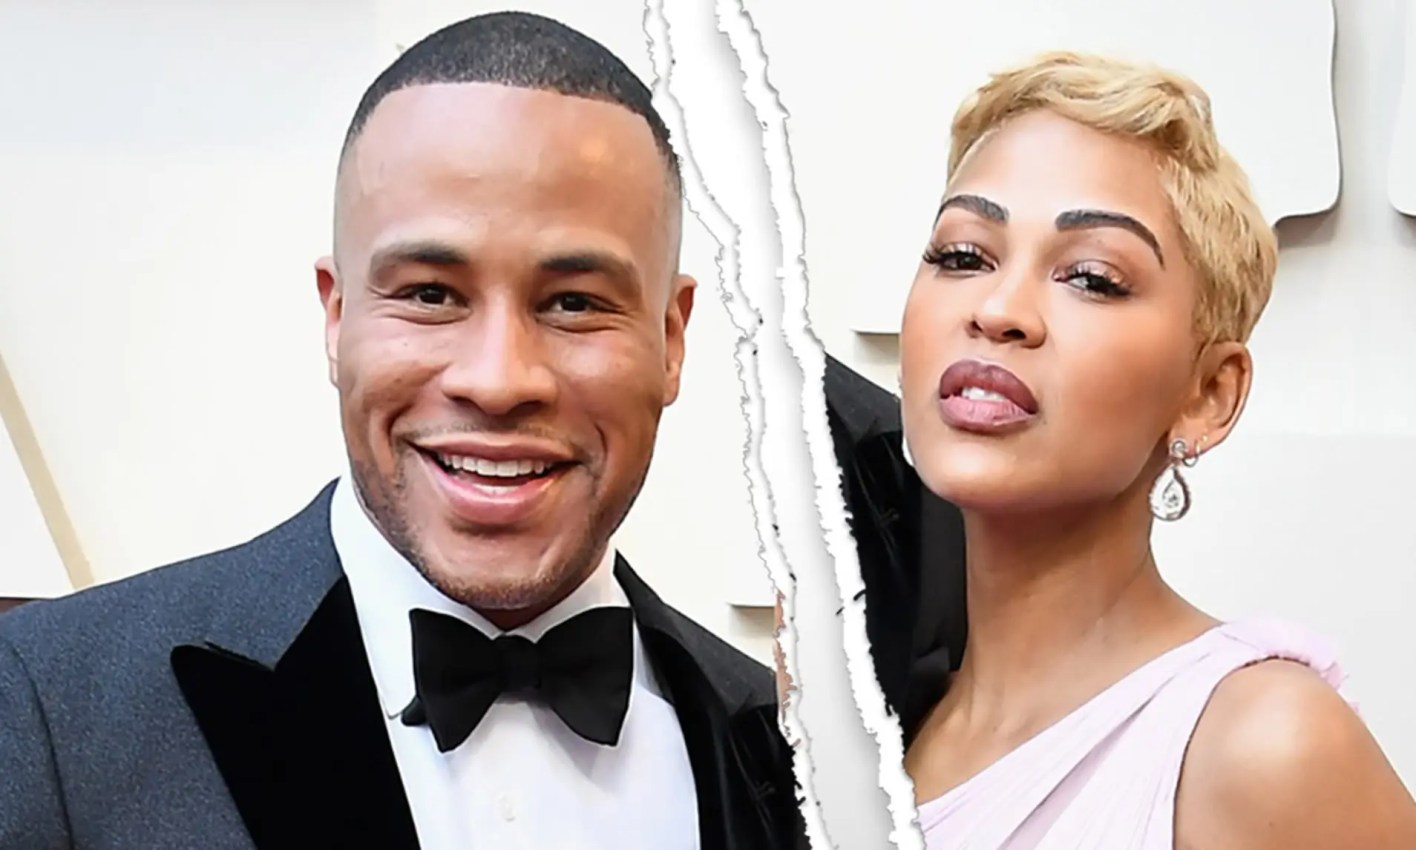 Meagan Good and DeVon Franklin split after 9 years of marriage